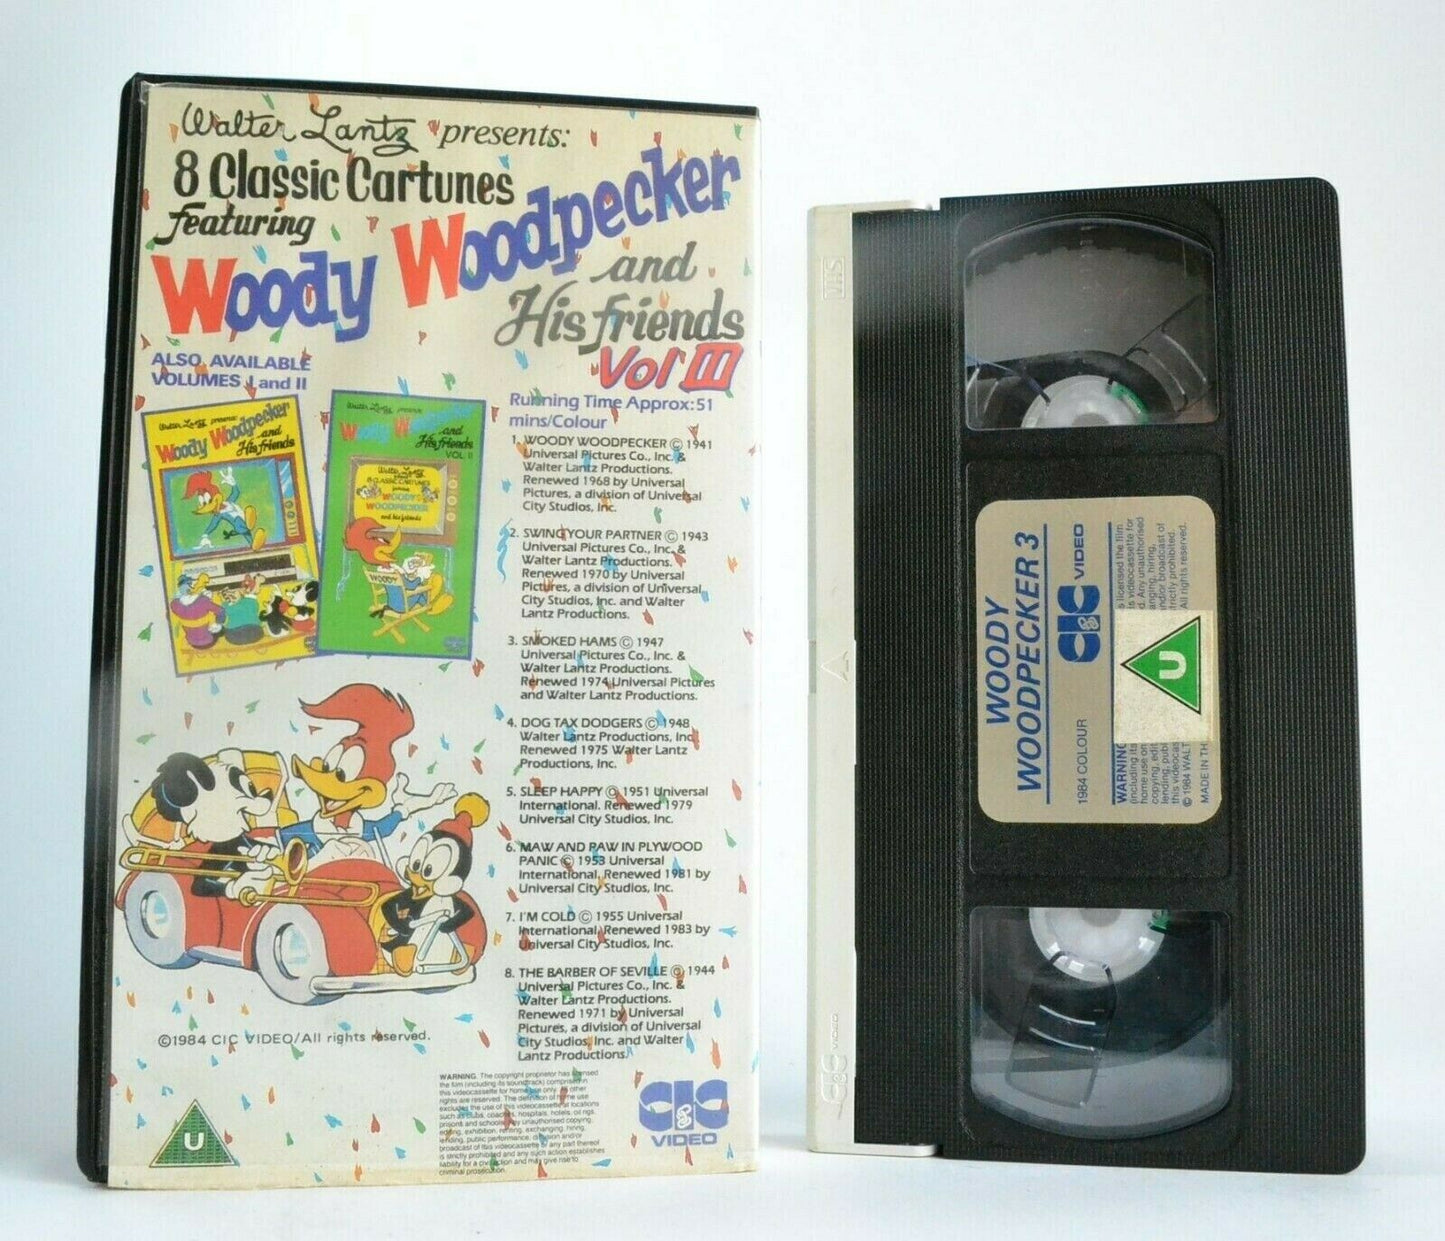 Woody Woodpecker And His Friends, Vol.3: (1984) CIC Video - Animated - Pal VHS-